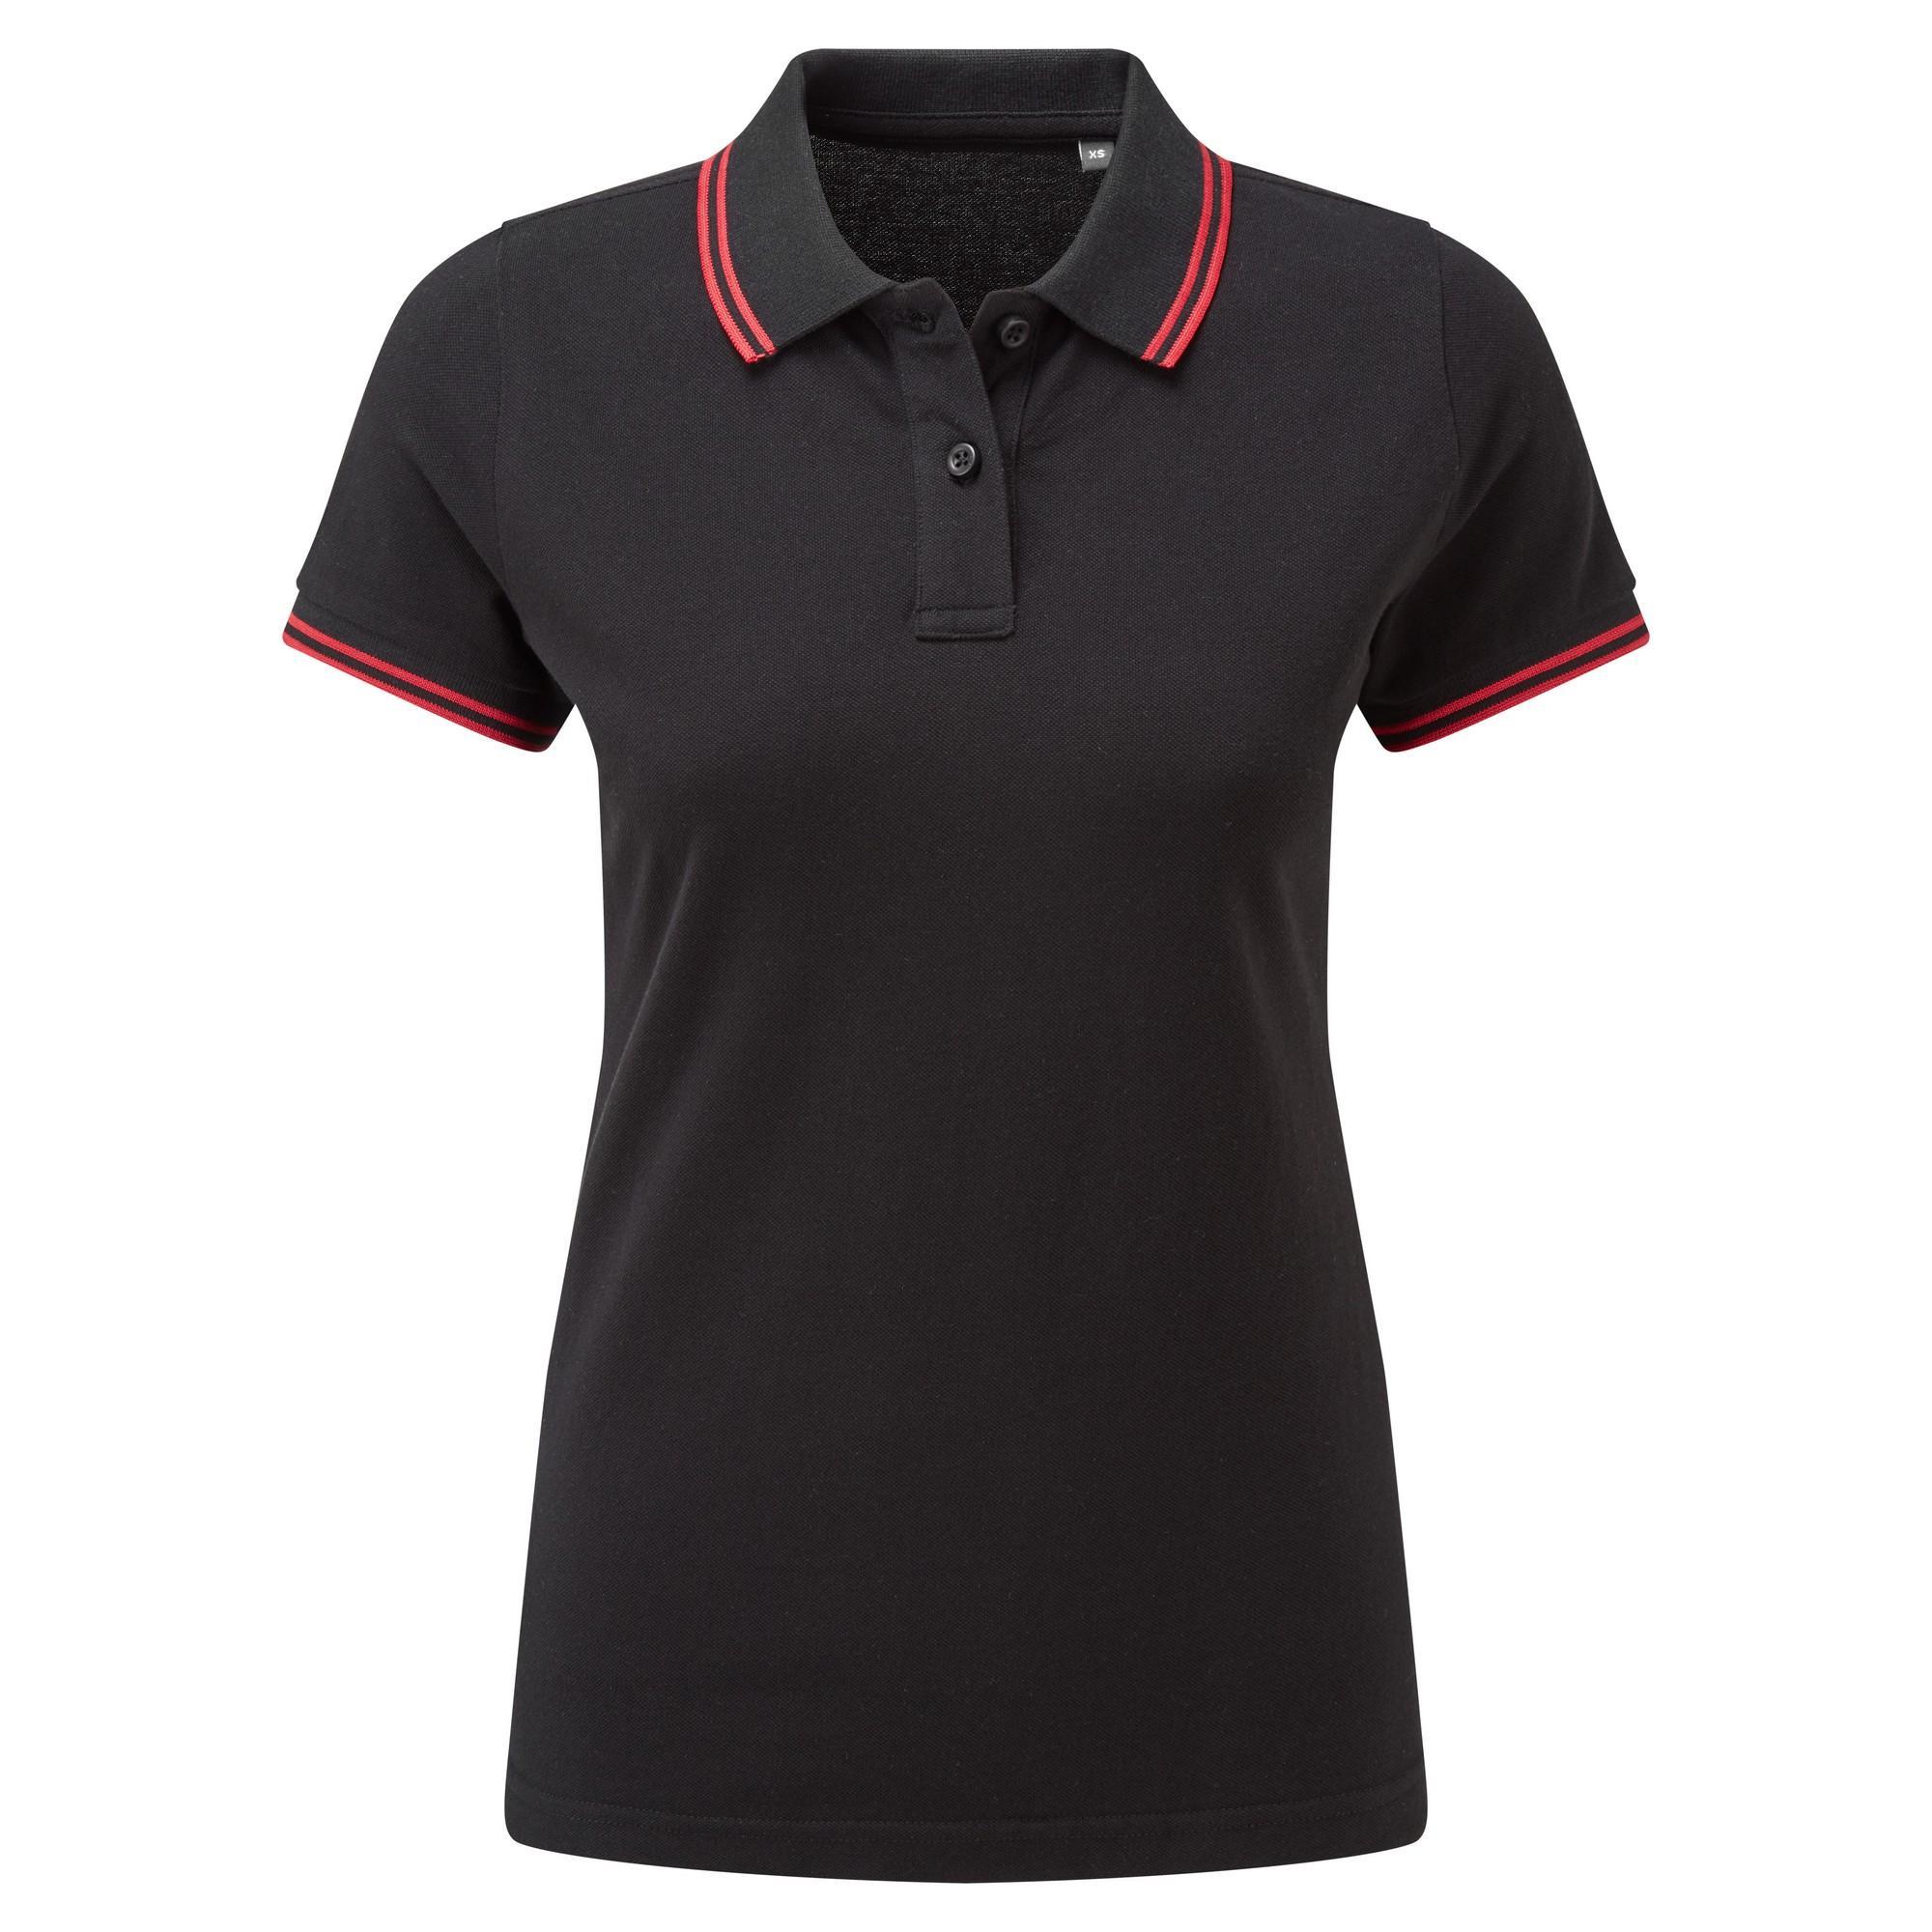 Asquith & Fox Womens/Ladies Classic Fit Tipped Polo (Black/Red) (L)